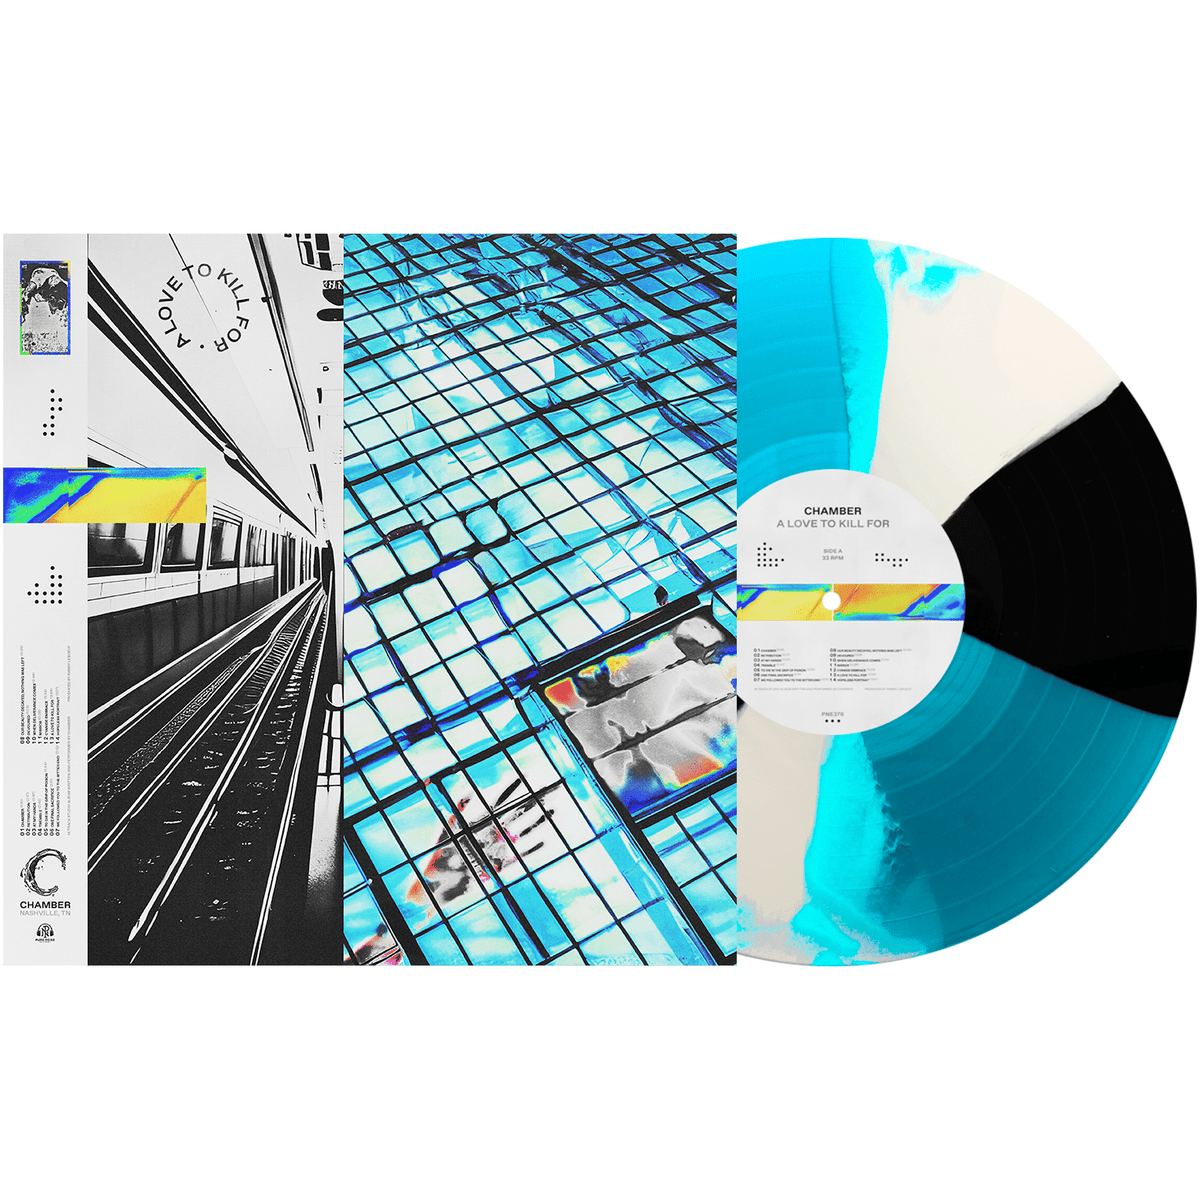 Chamber - A Love To Kill For (Blue, White, and Black Twist Vinyl)